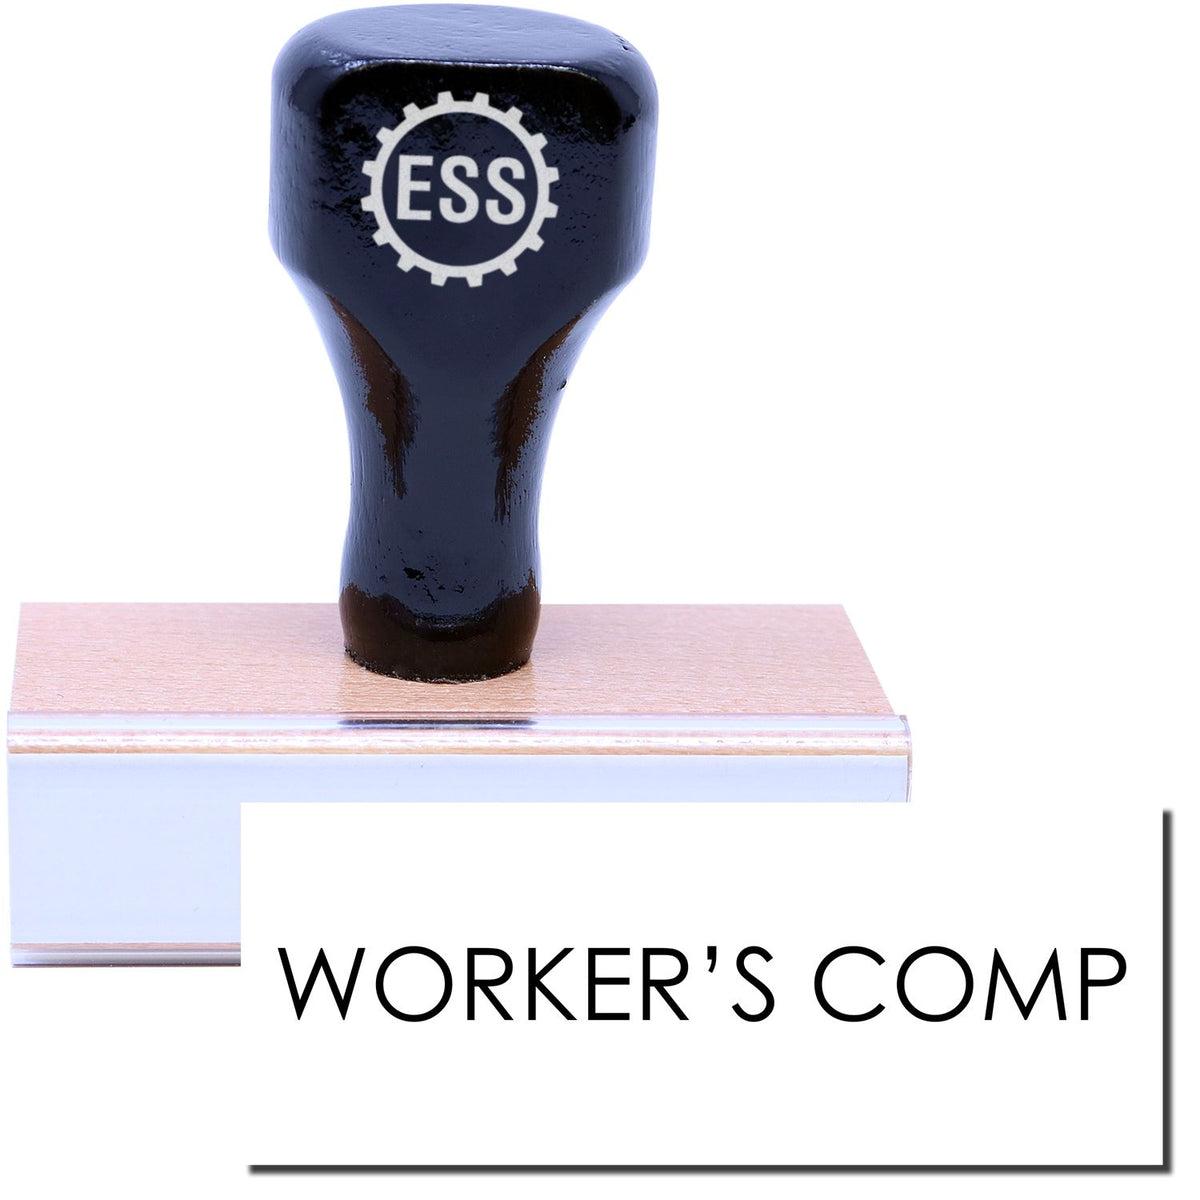 A stock office rubber stamp with a stamped image showing how the text &quot;WORKER&#39;S COMP&quot; in a large font is displayed after stamping.